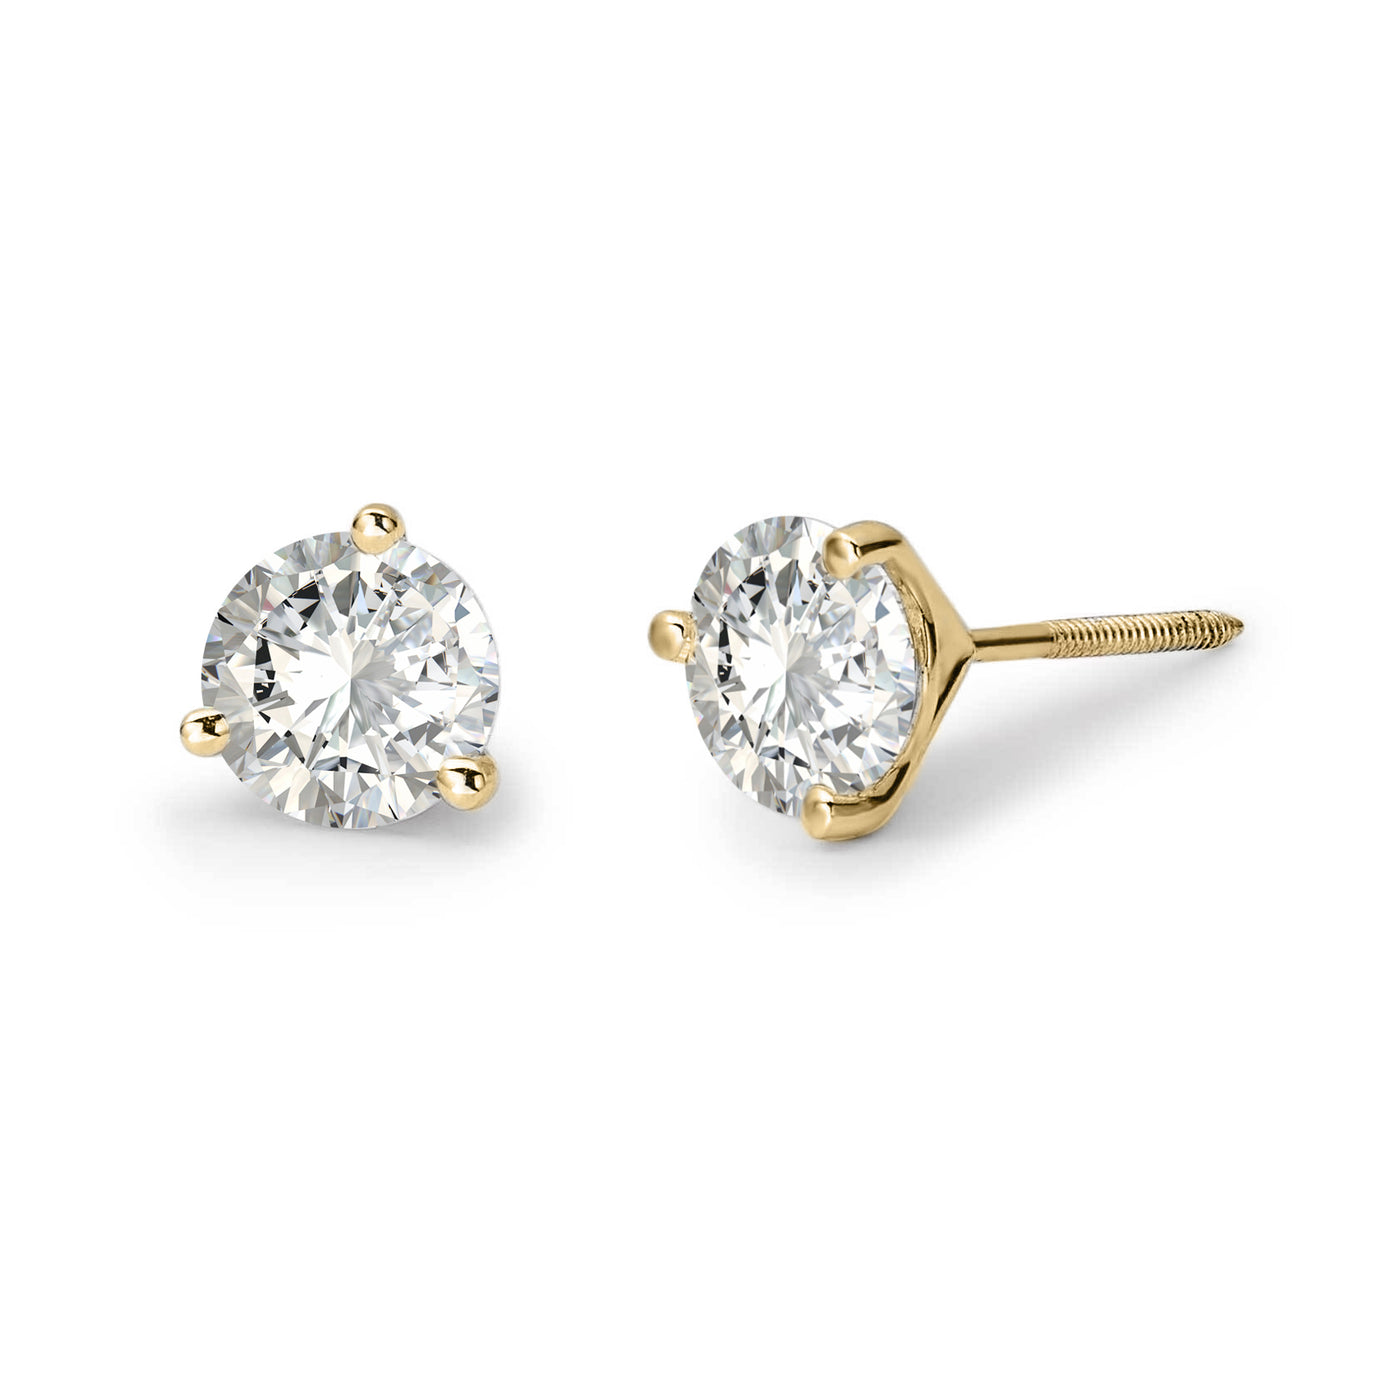 Women's Three Prong Round-Cut Solitaire Diamond Stud Earrings 14K Gold